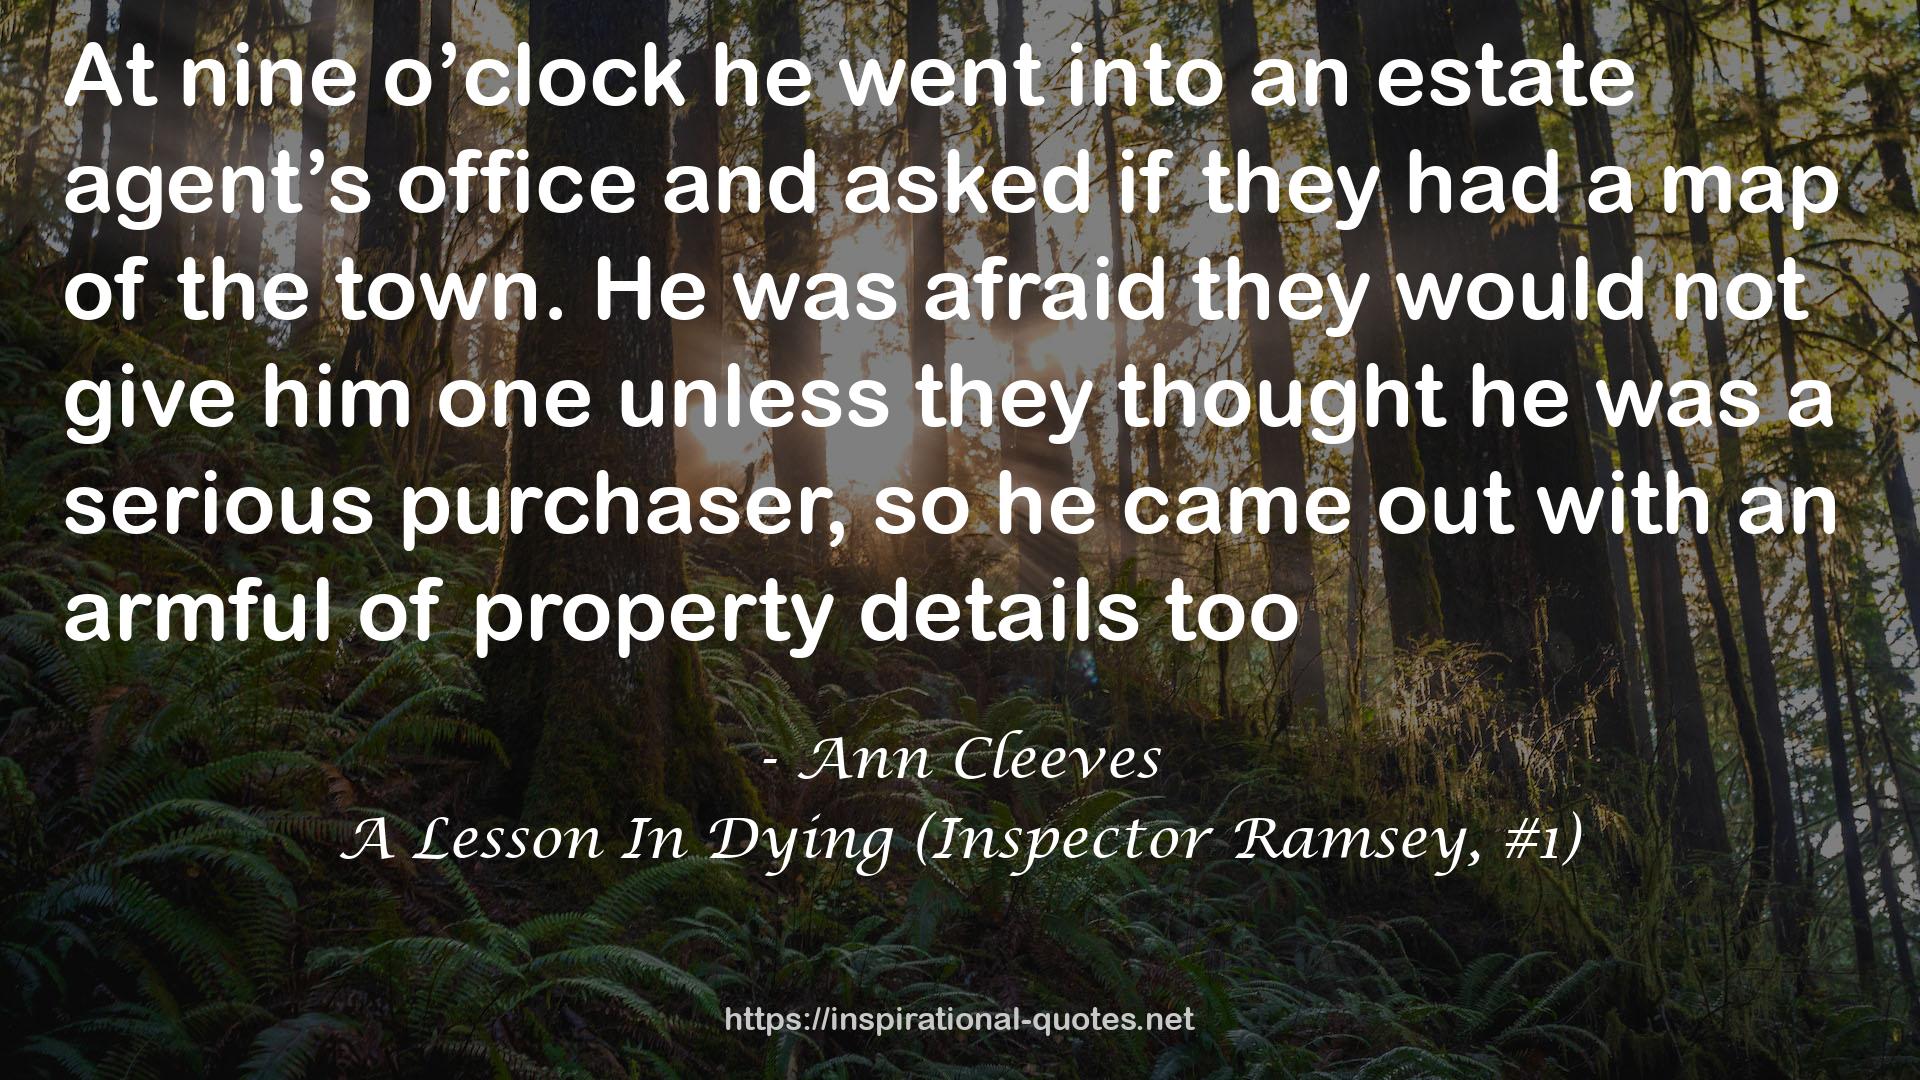 A Lesson In Dying (Inspector Ramsey, #1) QUOTES